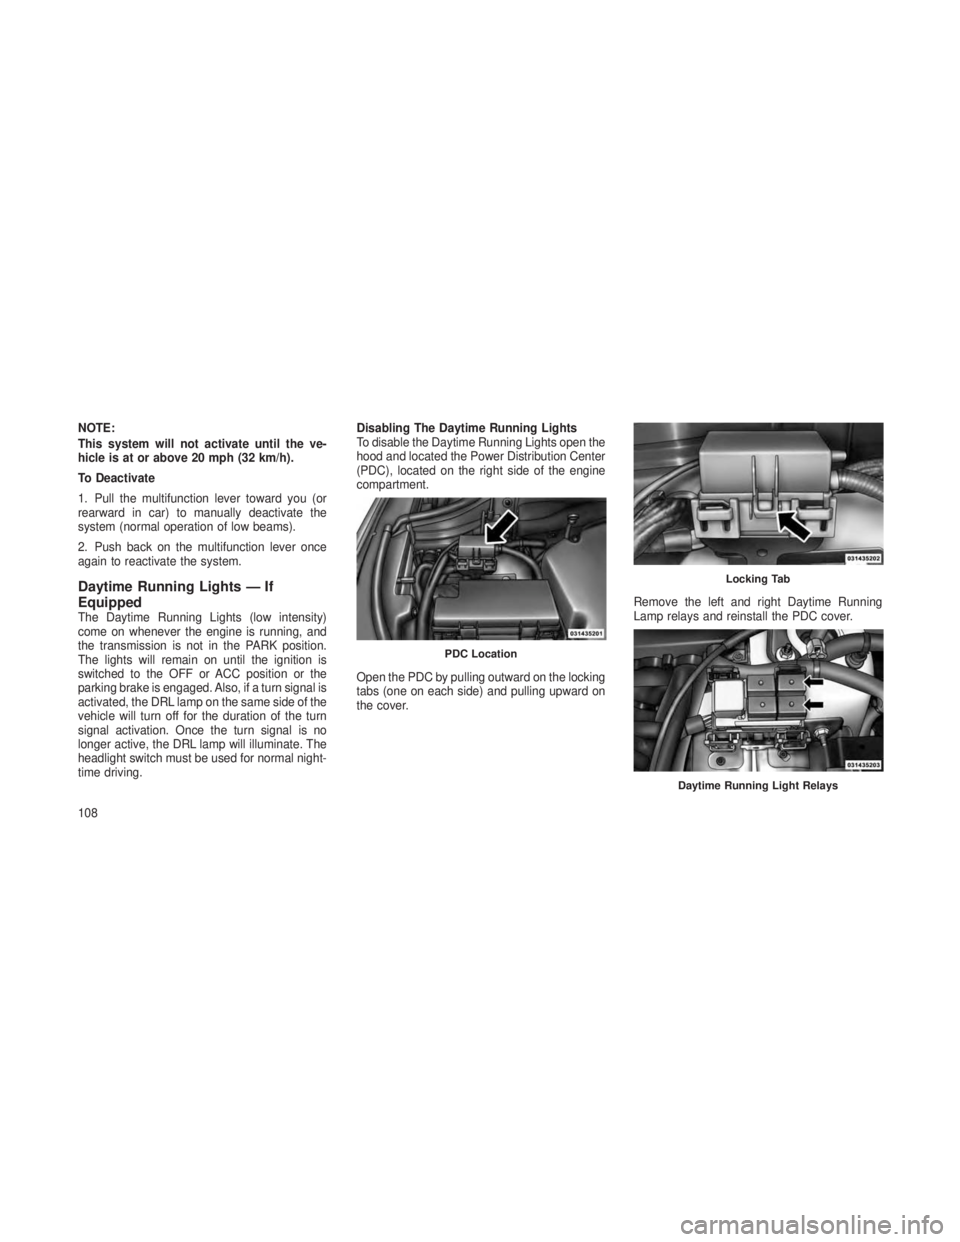 JEEP GRAND CHEROKEE 2013  Owner handbook (in English) NOTE:
This system will not activate until the ve-
hicle is at or above 20 mph (32 km/h).
To Deactivate
1. Pull the multifunction lever toward you (or
rearward in car) to manually deactivate the
system